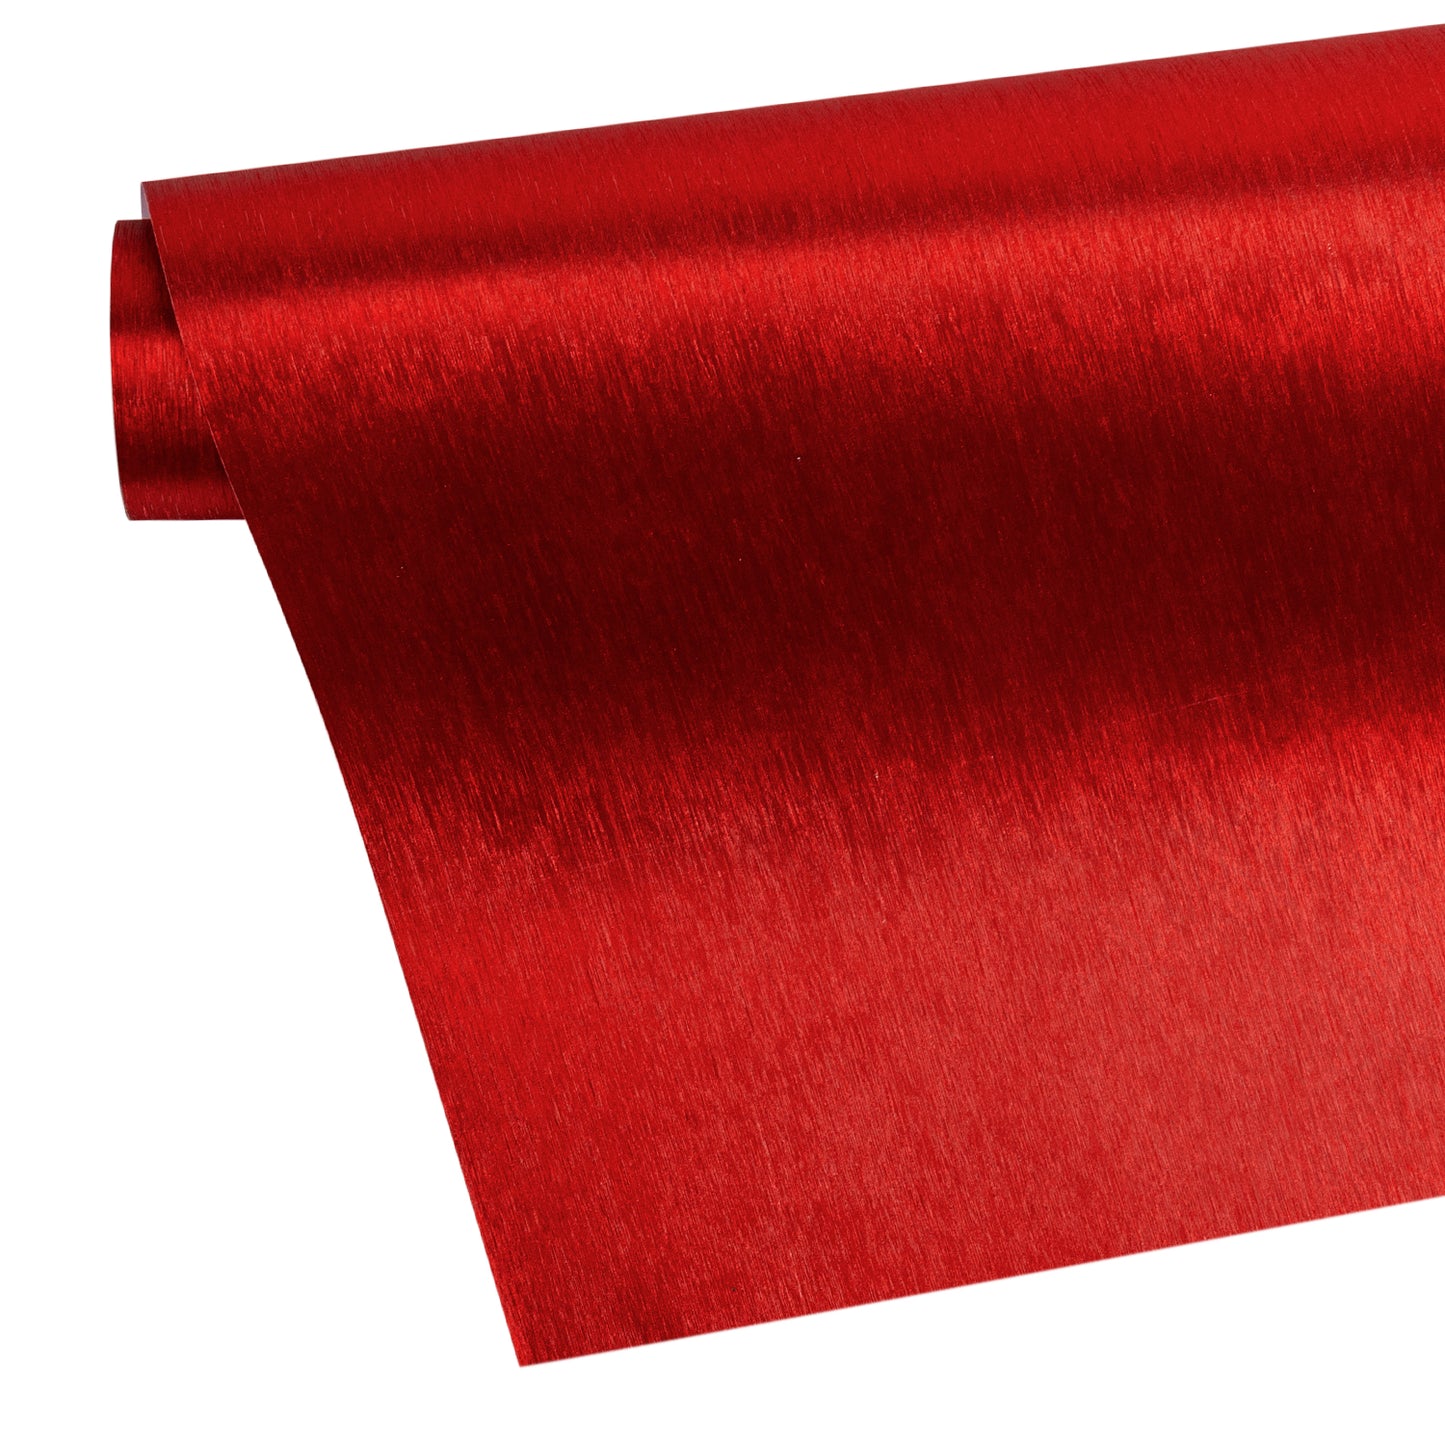 Brushed Aluminum Texture Metallic Wrapping Paper Roll Red Ream Wholesale Wraphaholic